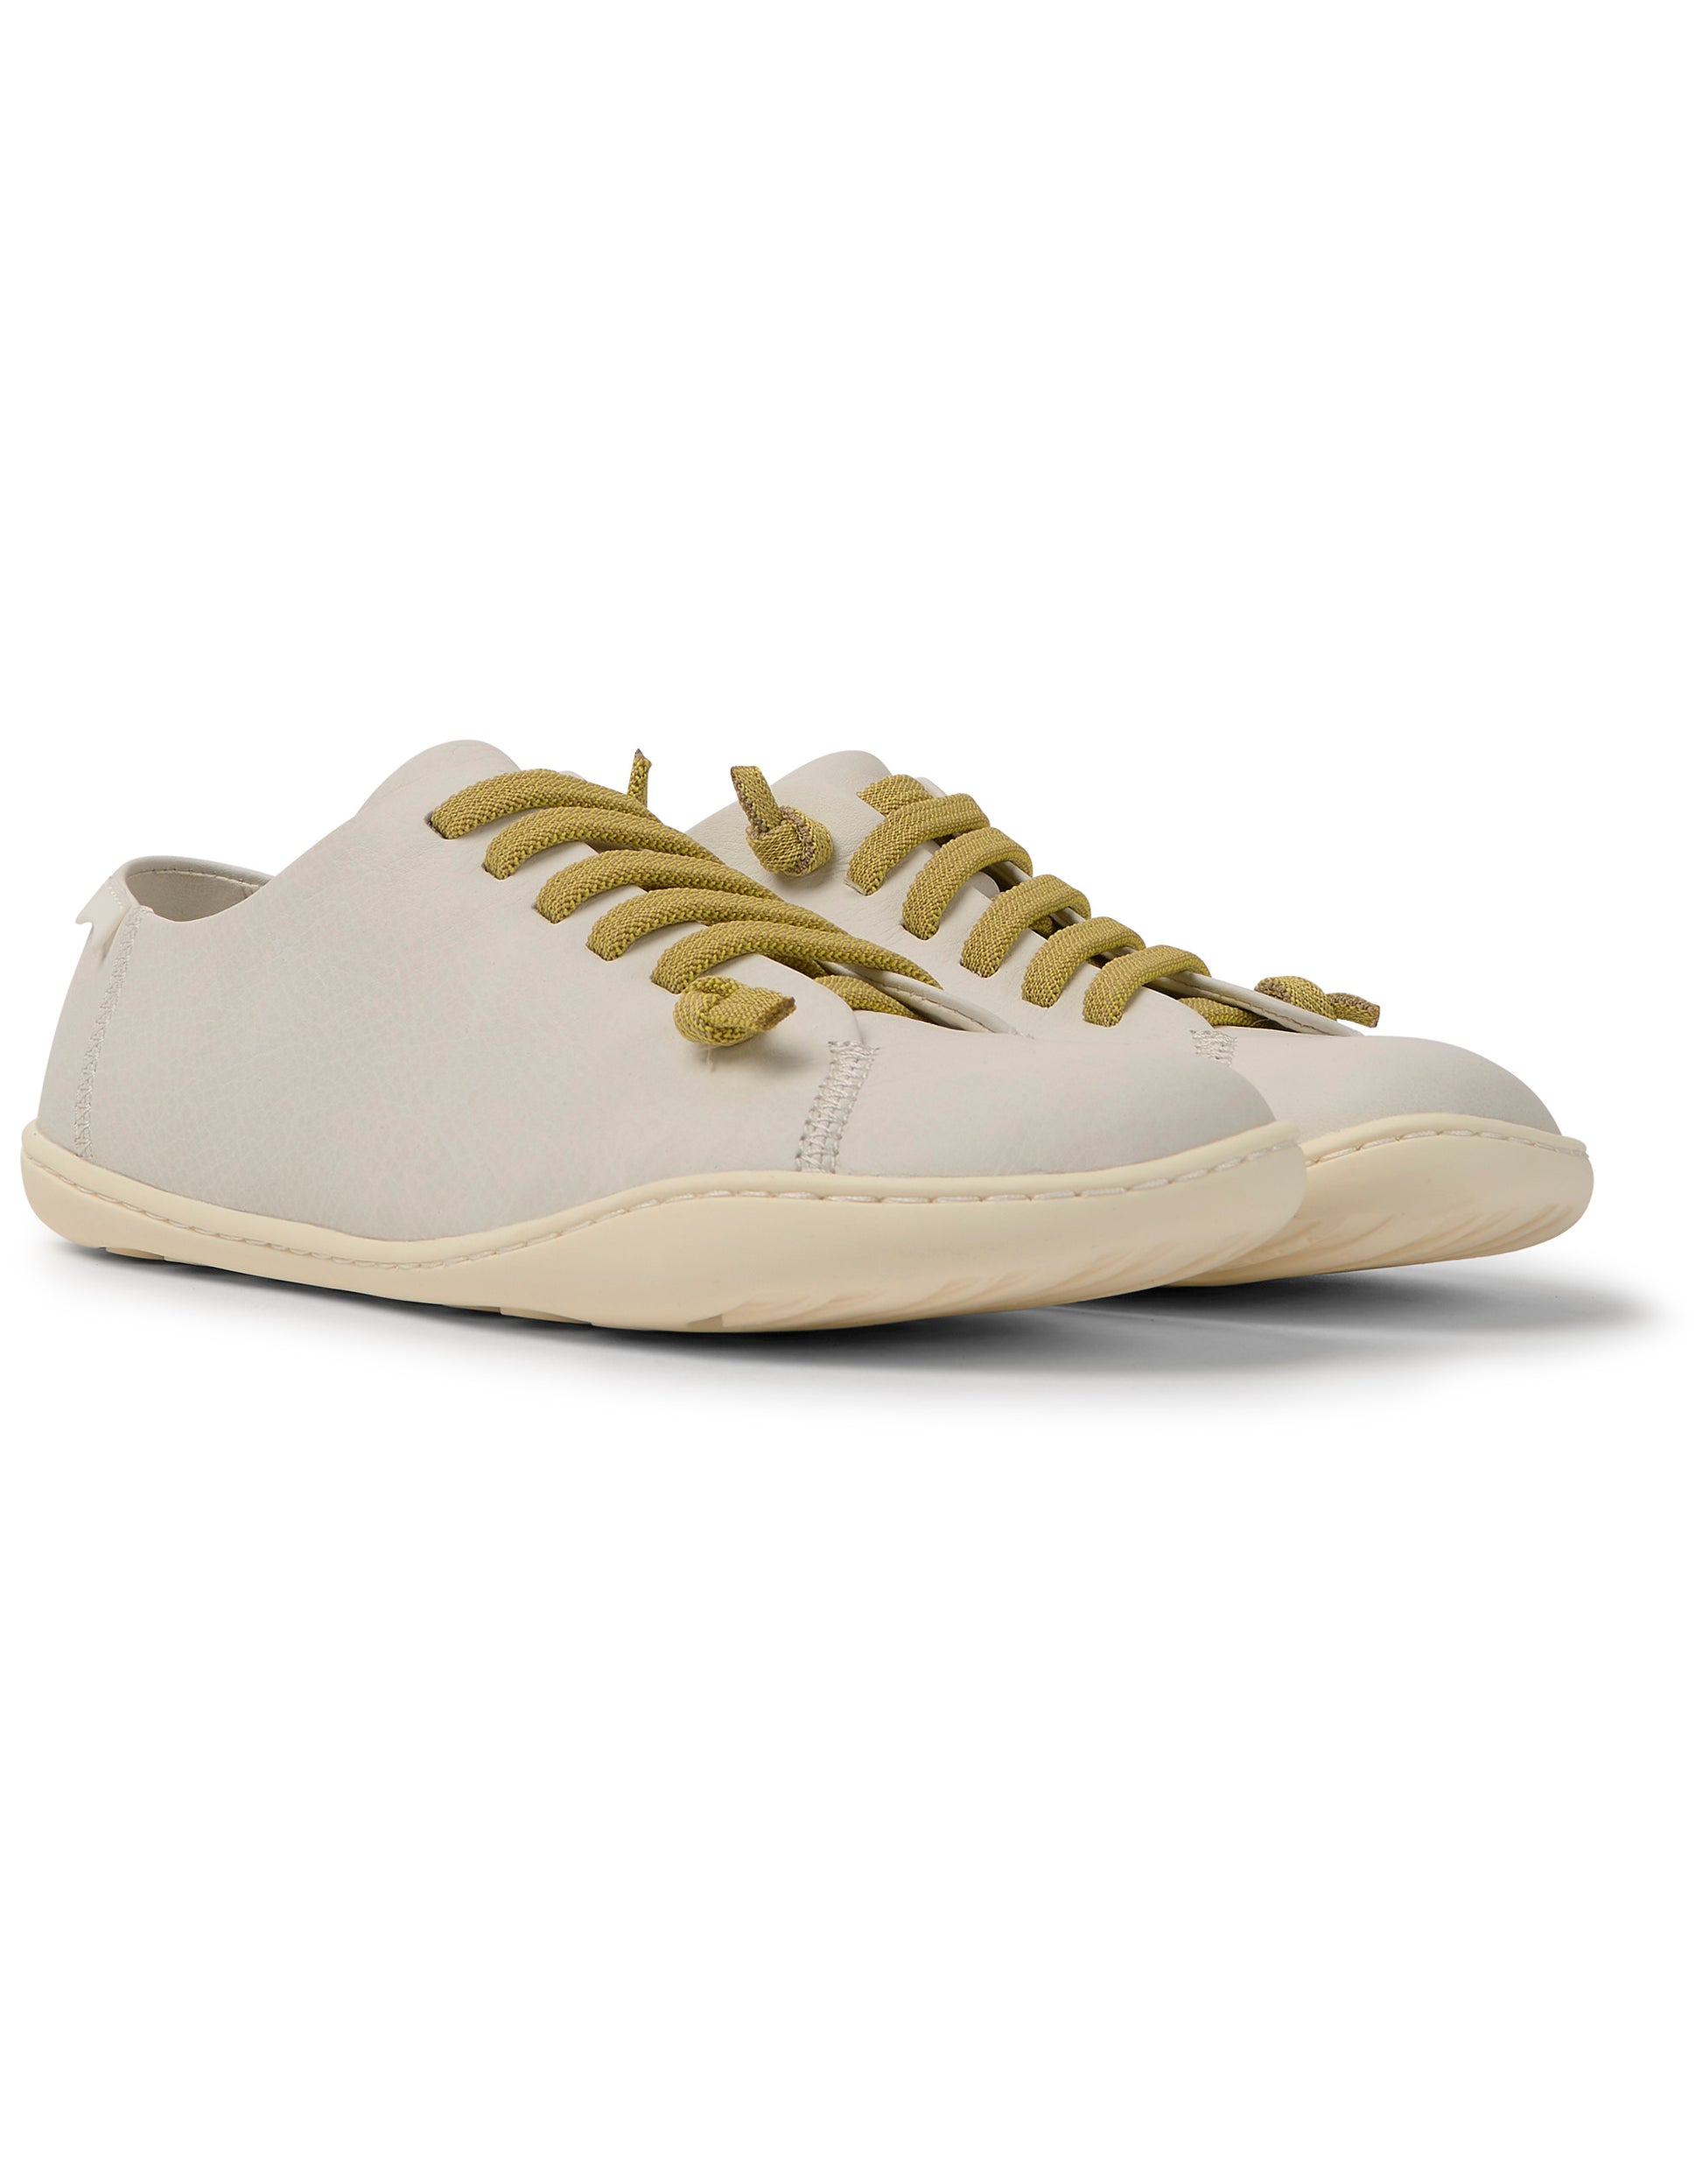 Camper k200514-014 peu white trainer with mustard laces - Imeldas Shoes Norwich